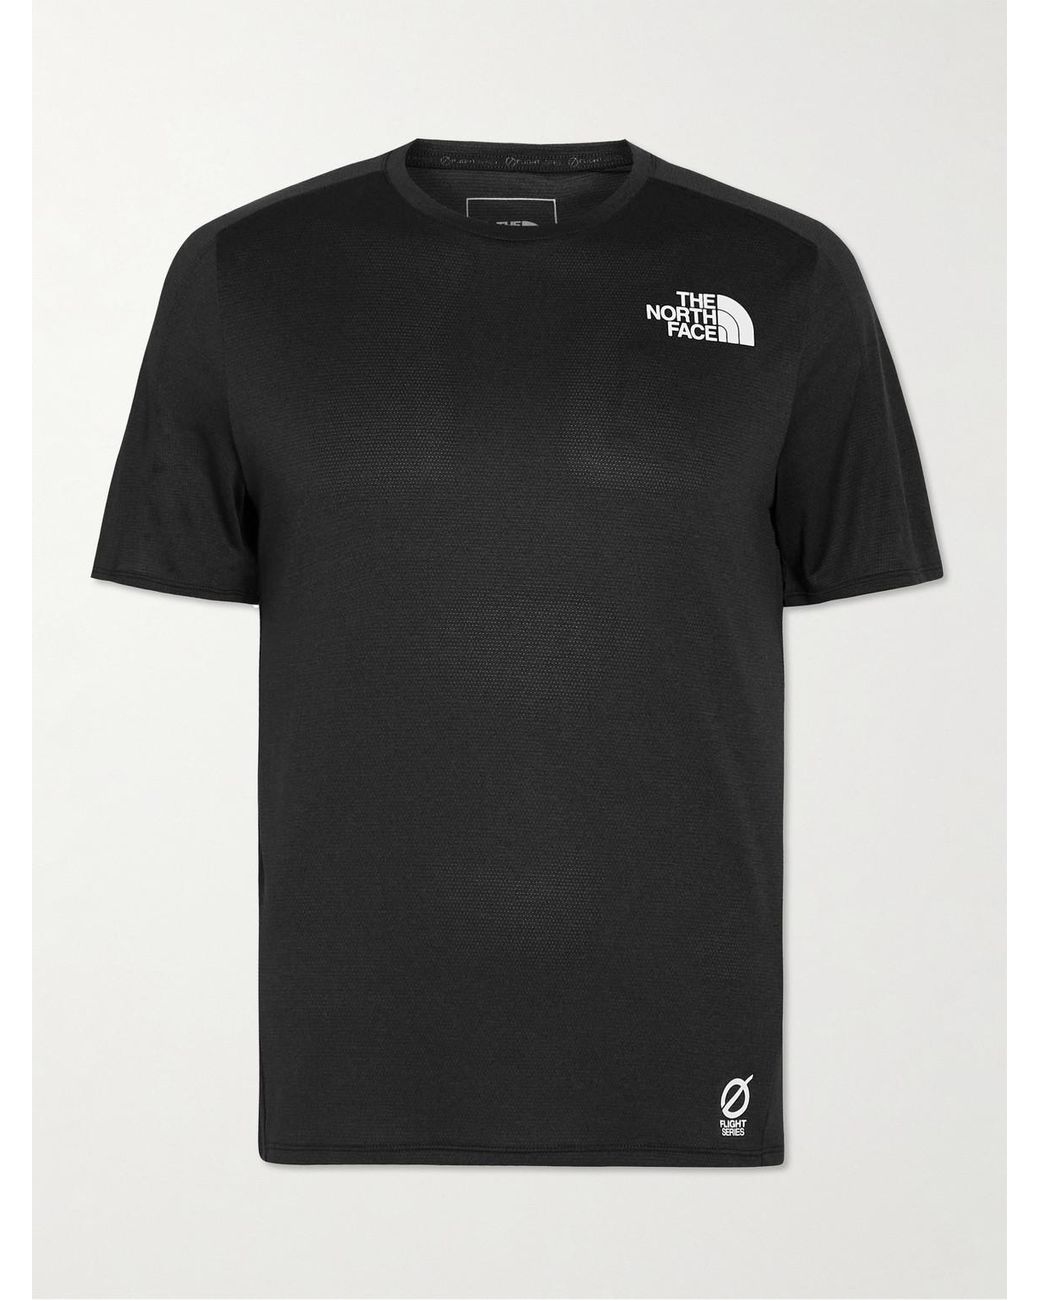 The North Face Flashdry Jersey T-shirt in Black for Men | Lyst UK